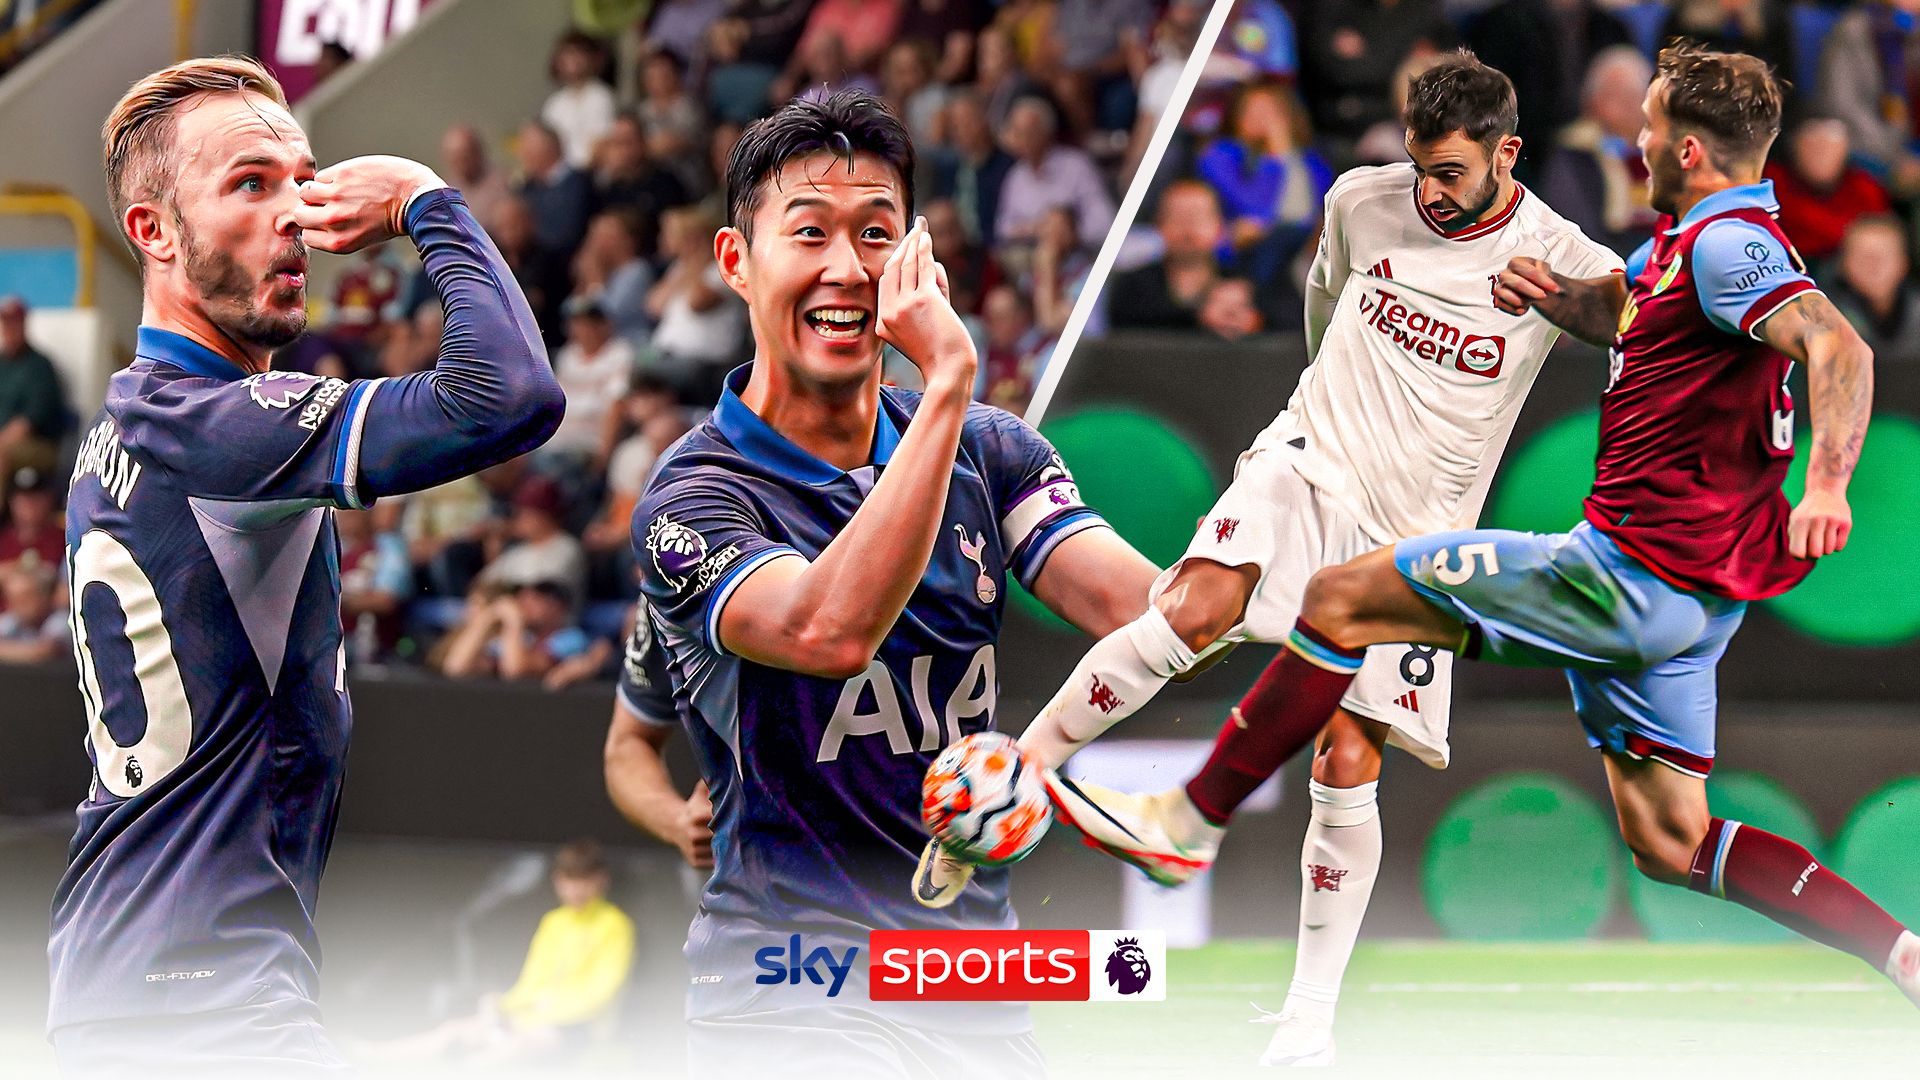 Bruno's Volley, Maddison's Magic & Andersen's Stunner! | Which is your PL GOTM?